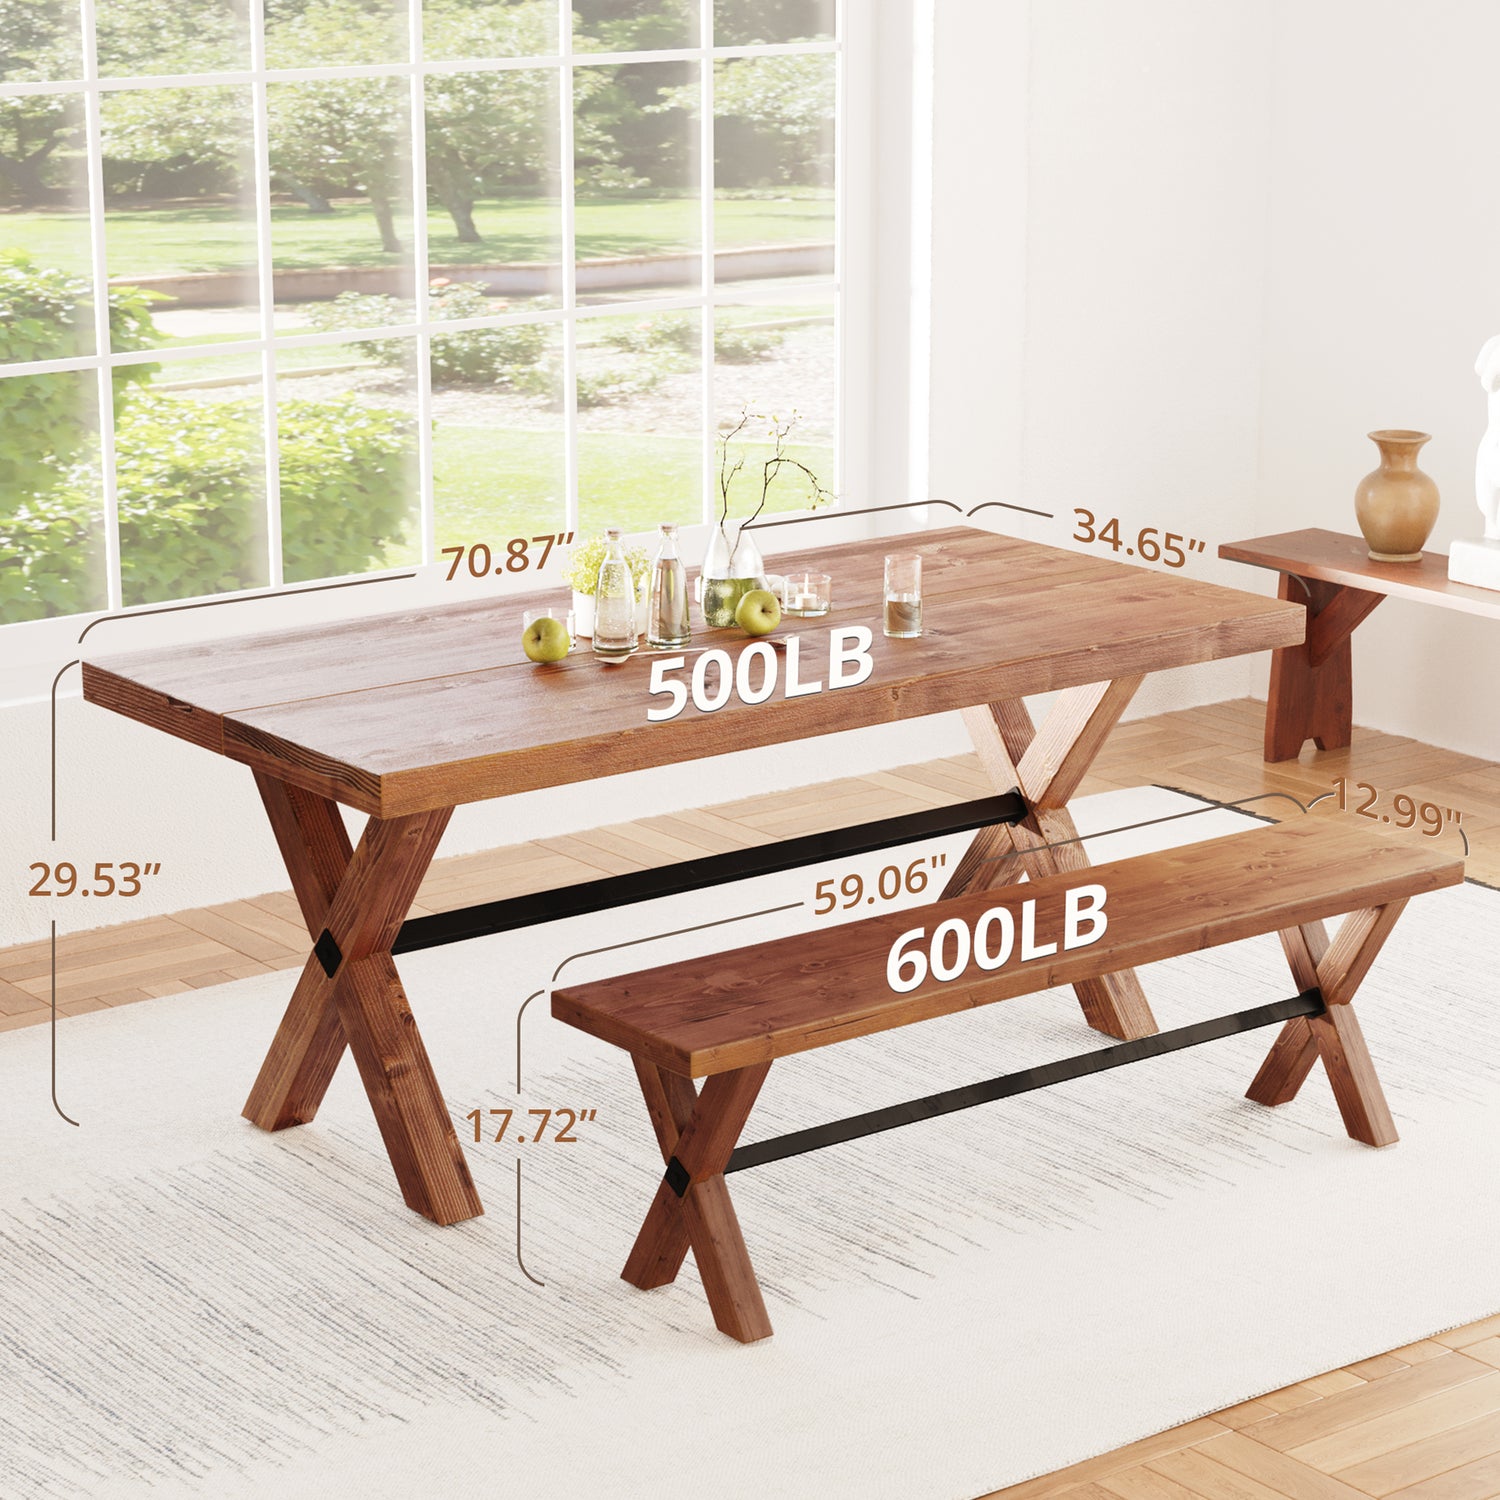 71'' Table & 59'' Bench